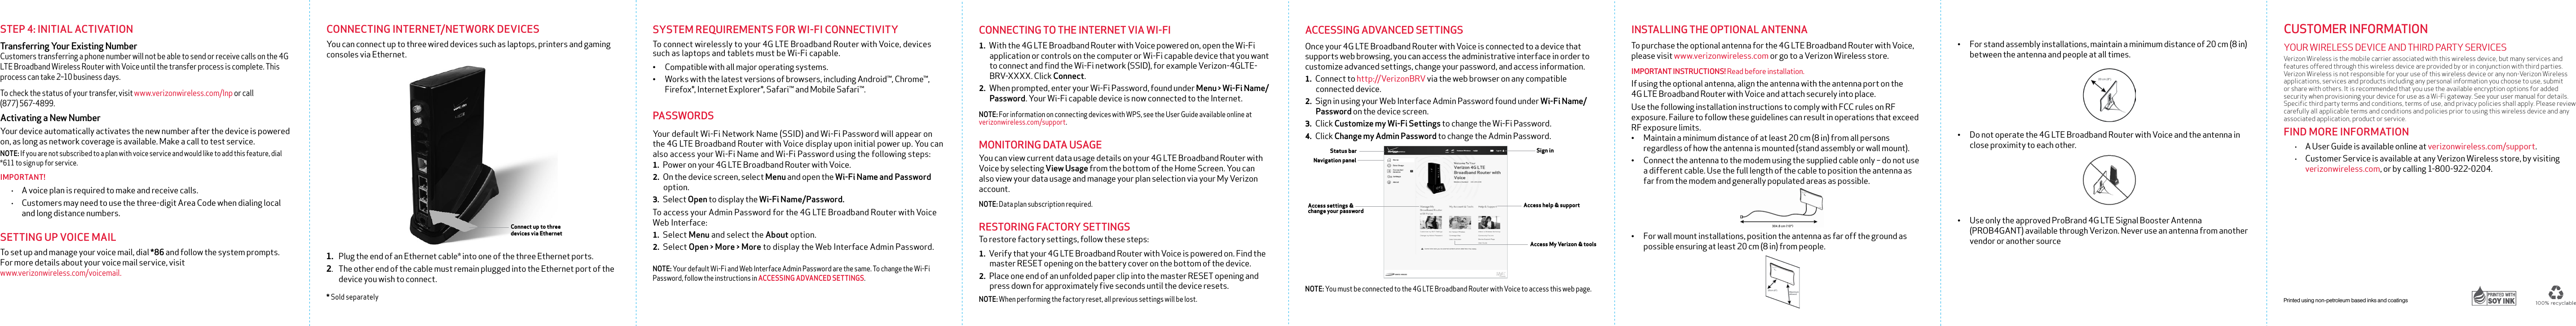 ACCESSING ADVANCED SETTINGSOnce your 4G LTE Broadband Router with Voice is connected to a device that supports web browsing, you can access the administrative interface in order to customize advanced settings, change your password, and access information.1. Connect to http://VerizonBRV via the web browser on any compatible connected device. 2. Sign in using your Web Interface Admin Password found under Wi-Fi Name/Password on the device screen. 3. Click Customize my Wi-Fi Settings to change the Wi-Fi Password.4. Click Change my Admin Password to change the Admin Password.NOTE: You must be connected to the 4G LTE Broadband Router with Voice to access this web page.CONNECTING TO THE INTERNET VIA WI-FI1. With the 4G LTE Broadband Router with Voice powered on, open the Wi-Fi application or controls on the computer or Wi-Fi capable device that you want to connect and find the Wi-Fi network (SSID), for example Verizon-4GLTE-BRV-XXXX. Click Connect. 2. When prompted, enter your Wi-Fi Password, found under Menu &gt; Wi-Fi Name/Password. Your Wi-Fi capable device is now connected to the Internet. NOTE: For information on connecting devices with WPS, see the User Guide available online at verizonwireless.com/support.MONITORING DATA USAGEYou can view current data usage details on your 4G LTE Broadband Router with Voice by selecting View Usage from the bottom of the Home Screen. You can also view your data usage and manage your plan selection via your My Verizon account.NOTE: Data plan subscription required.RESTORING FACTORY SETTINGSTo restore factory settings, follow these steps:1. Verify that your 4G LTE Broadband Router with Voice is powered on. Find the master RESET opening on the battery cover on the bottom of the device.2. Place one end of an unfolded paper clip into the master RESET opening and press down for approximately five seconds until the device resets.NOTE: When performing the factory reset, all previous settings will be lost.SYSTEM REQUIREMENTS FOR WI-FI CONNECTIVITYTo connect wirelessly to your 4G LTE Broadband Router with Voice, devices such as laptops and tablets must be Wi-Fi capable.• Compatible with all major operating systems.• Works with the latest versions of browsers, including Android™, Chrome™, Firefox®, Internet Explorer®, Safari™ and Mobile Safari™. PASSWORDSYour default Wi-Fi Network Name (SSID) and Wi-Fi Password will appear on the 4G LTE Broadband Router with Voice display upon initial power up. You can also access your Wi-Fi Name and Wi-Fi Password using the following steps: 1. Power on your 4G LTE Broadband Router with Voice.2. On the device screen, select Menu and open the Wi-Fi Name and Password option.3. Select Open to display the Wi-Fi Name/Password. To access your Admin Password for the 4G LTE Broadband Router with Voice Web Interface:1. Select Menu and select the About option.2. Select Open &gt; More &gt; More to display the Web Interface Admin Password. NOTE: Your default Wi-Fi and Web Interface Admin Password are the same. To change the Wi-Fi Password, follow the instructions in ACCESSING ADVANCED SETTINGS.CUSTOMER INFORMATIONYOUR WIRELESS DEVICE AND THIRD PARTY SERVICES Verizon Wireless is the mobile carrier associated with this wireless device, but many services and features offered through this wireless device are provided by or in conjunction with third parties. Verizon Wireless is not responsible for your use of this wireless device or any non-Verizon Wireless applications, services and products including any personal information you choose to use, submit or share with others. It is recommended that you use the available encryption options for added security when provisioning your device for use as a Wi-Fi gateway. See your user manual for details. Specific third party terms and conditions, terms of use, and privacy policies shall apply. Please review carefully all applicable terms and conditions and policies prior to using this wireless device and any associated application, product or service.FIND MORE INFORMATION• A User Guide is available online at verizonwireless.com/support.• Customer Service is available at any Verizon Wireless store, by visiting verizonwireless.com, or by calling 1-800-922-0204. Printed using non-petroleum based inks and coatingsNavigation panelAccess settings &amp; change your passwordSign inAccess help &amp; supportAccess My Verizon &amp; toolsStatus barINSTALLING THE OPTIONAL ANTENNATo purchase the optional antenna for the 4G LTE Broadband Router with Voice, please visit www.verizonwireless.com or go to a Verizon Wireless store.IMPORTANT INSTRUCTIONS! Read before installation. If using the optional antenna, align the antenna with the antenna port on the  4G LTE Broadband Router with Voice and attach securely into place.Use the following installation instructions to comply with FCC rules on RF exposure. Failure to follow these guidelines can result in operations that exceed RF exposure limits. • Maintain a minimum distance of at least 20 cm (8 in) from all persons regardless of how the antenna is mounted (stand assembly or wall mount).• Connect the antenna to the modem using the supplied cable only – do not use a different cable. Use the full length of the cable to position the antenna as far from the modem and generally populated areas as possible. • For wall mount installations, position the antenna as far off the ground as possible ensuring at least 20 cm (8 in) from people.• For stand assembly installations, maintain a minimum distance of 20 cm (8 in) between the antenna and people at all times.• Do not operate the 4G LTE Broadband Router with Voice and the antenna in close proximity to each other.• Use only the approved ProBrand 4G LTE Signal Booster Antenna (PROB4GANT) available through Verizon. Never use an antenna from another vendor or another sourceCONNECTING INTERNET/NETWORK DEVICESYou can connect up to three wired devices such as laptops, printers and gaming consoles via Ethernet. 1.  Plug the end of an Ethernet cable* into one of the three Ethernet ports.2.   The other end of the cable must remain plugged into the Ethernet port of the device you wish to connect. * Sold separatelyConnect up to three  devices via EthernetSTEP 4: INITIAL ACTIVATIONTransferring Your Existing Number Customers transferring a phone number will not be able to send or receive calls on the 4G LTE Broadband Wireless Router with Voice until the transfer process is complete. This process can take 2–10 business days. To check the status of your transfer, visit www.verizonwireless.com/lnp or call  (877) 567-4899.Activating a New NumberYour device automatically activates the new number after the device is powered on, as long as network coverage is available. Make a call to test service.NOTE: If you are not subscribed to a plan with voice service and would like to add this feature, dial *611 to sign up for service.IMPORTANT!• A voice plan is required to make and receive calls.• Customers may need to use the three-digit Area Code when dialing local and long distance numbers. SETTING UP VOICE MAILTo set up and manage your voice mail, dial *86 and follow the system prompts. For more details about your voice mail service, visit  www.verizonwireless.com/voicemail.